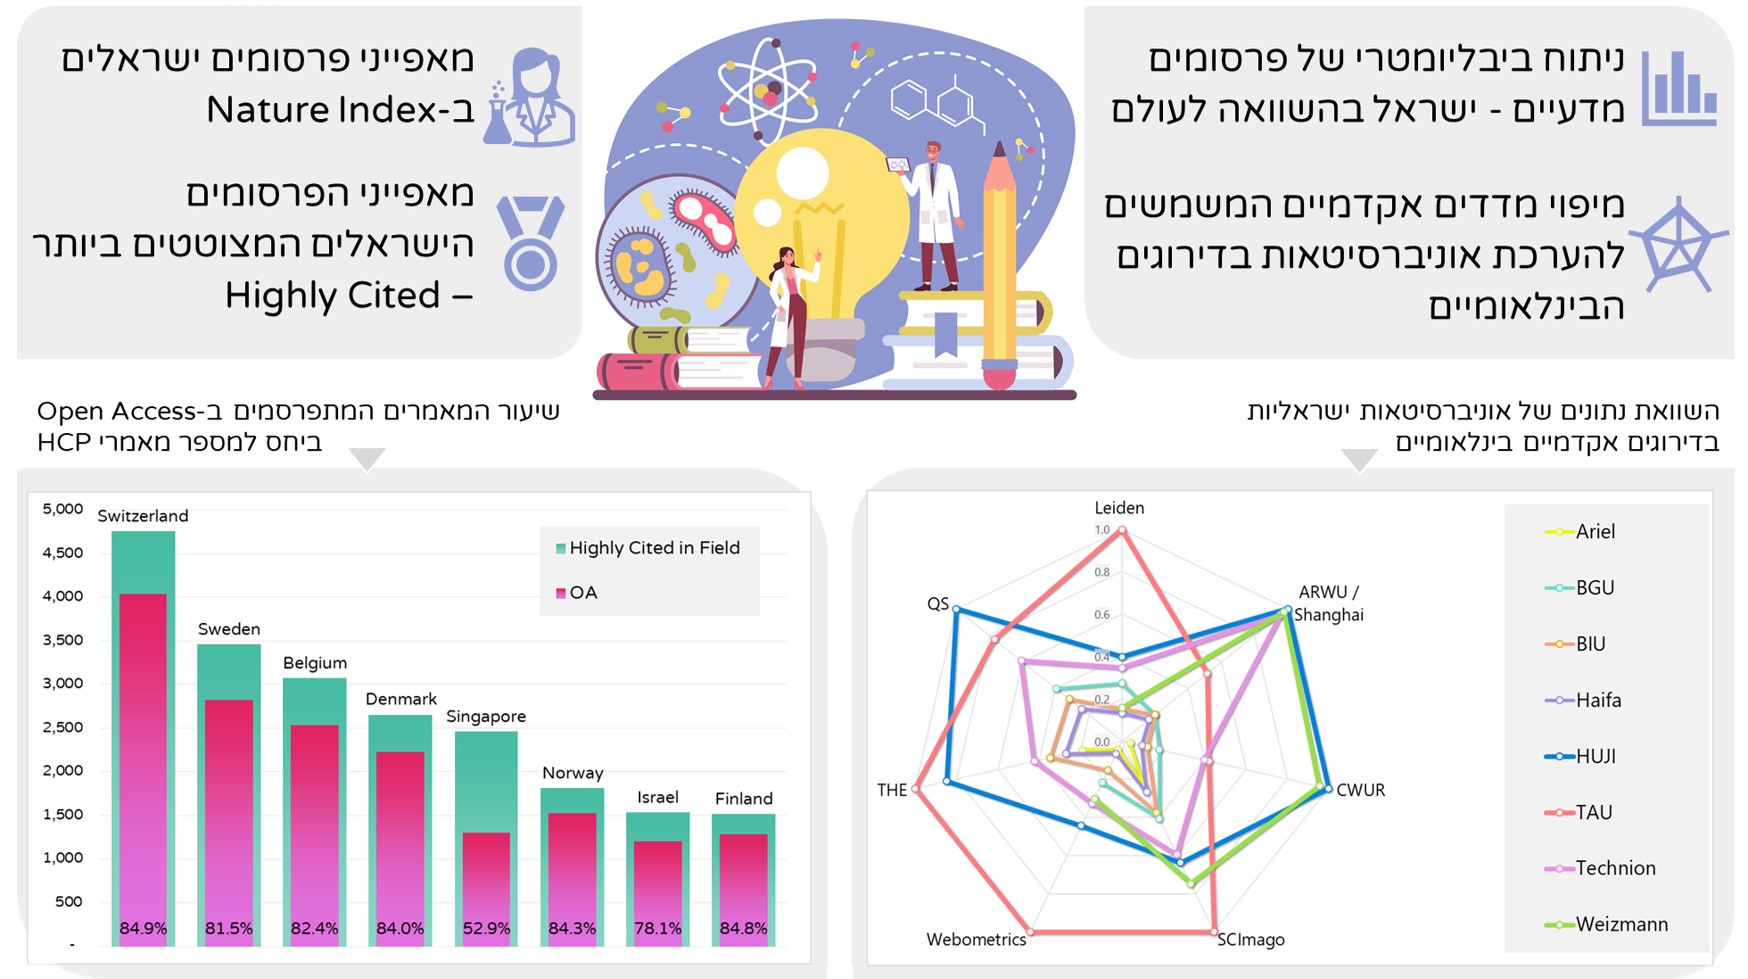 Dash_R&D Outputs in Israel Comparative Analysis of Scientific Publications 2020_20220322104552.176.jpg